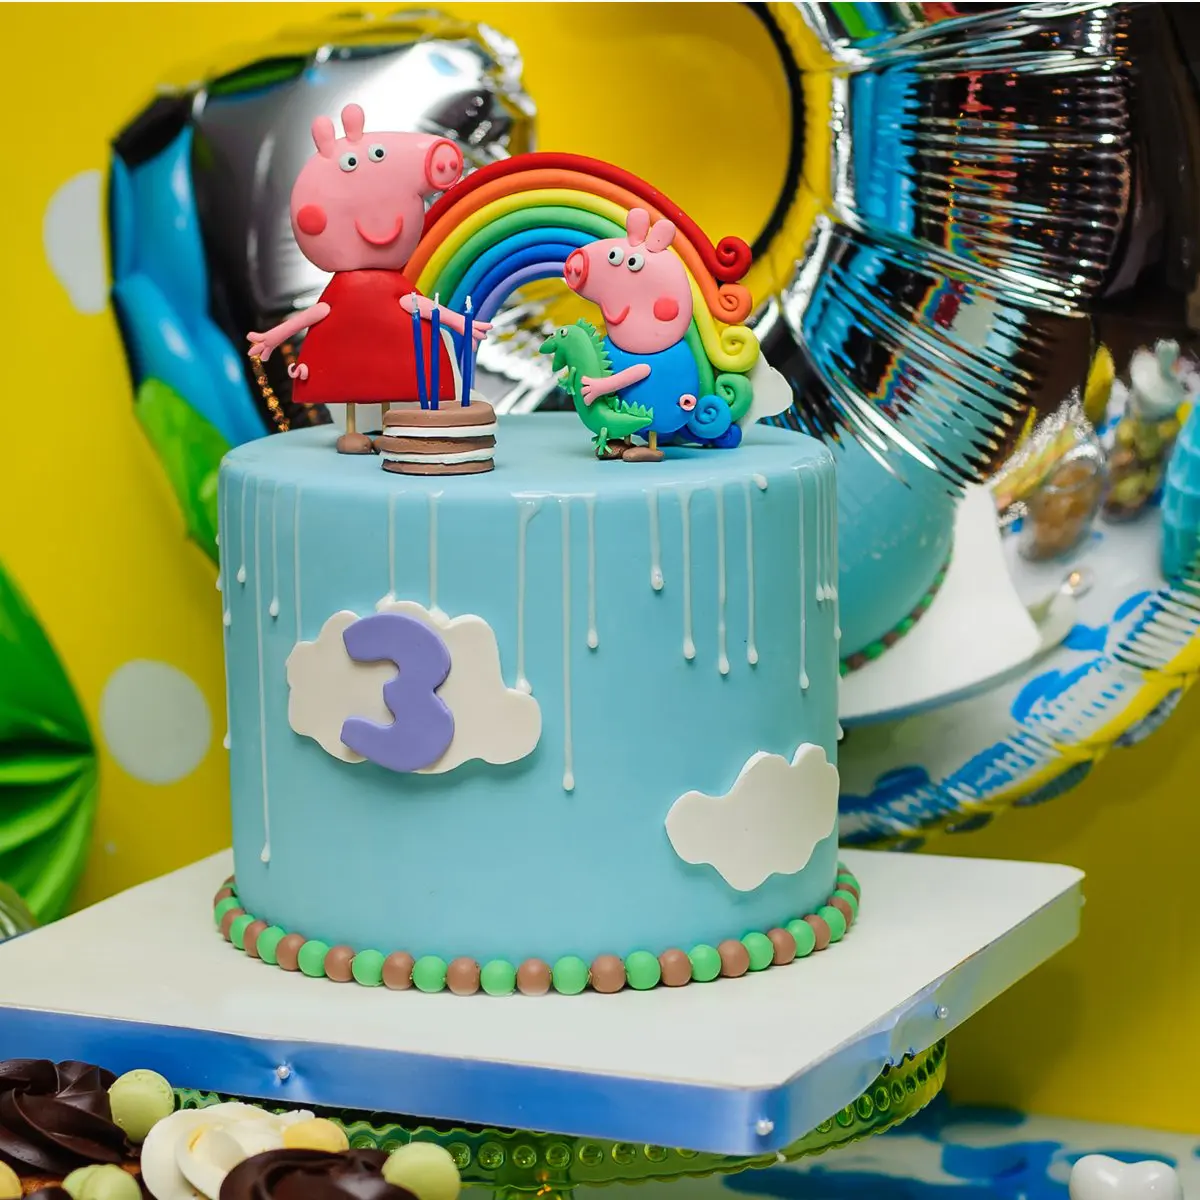 28 Of The Best Peppa Pig Birthday Cakes Made By Our Fans - Picniq Blog